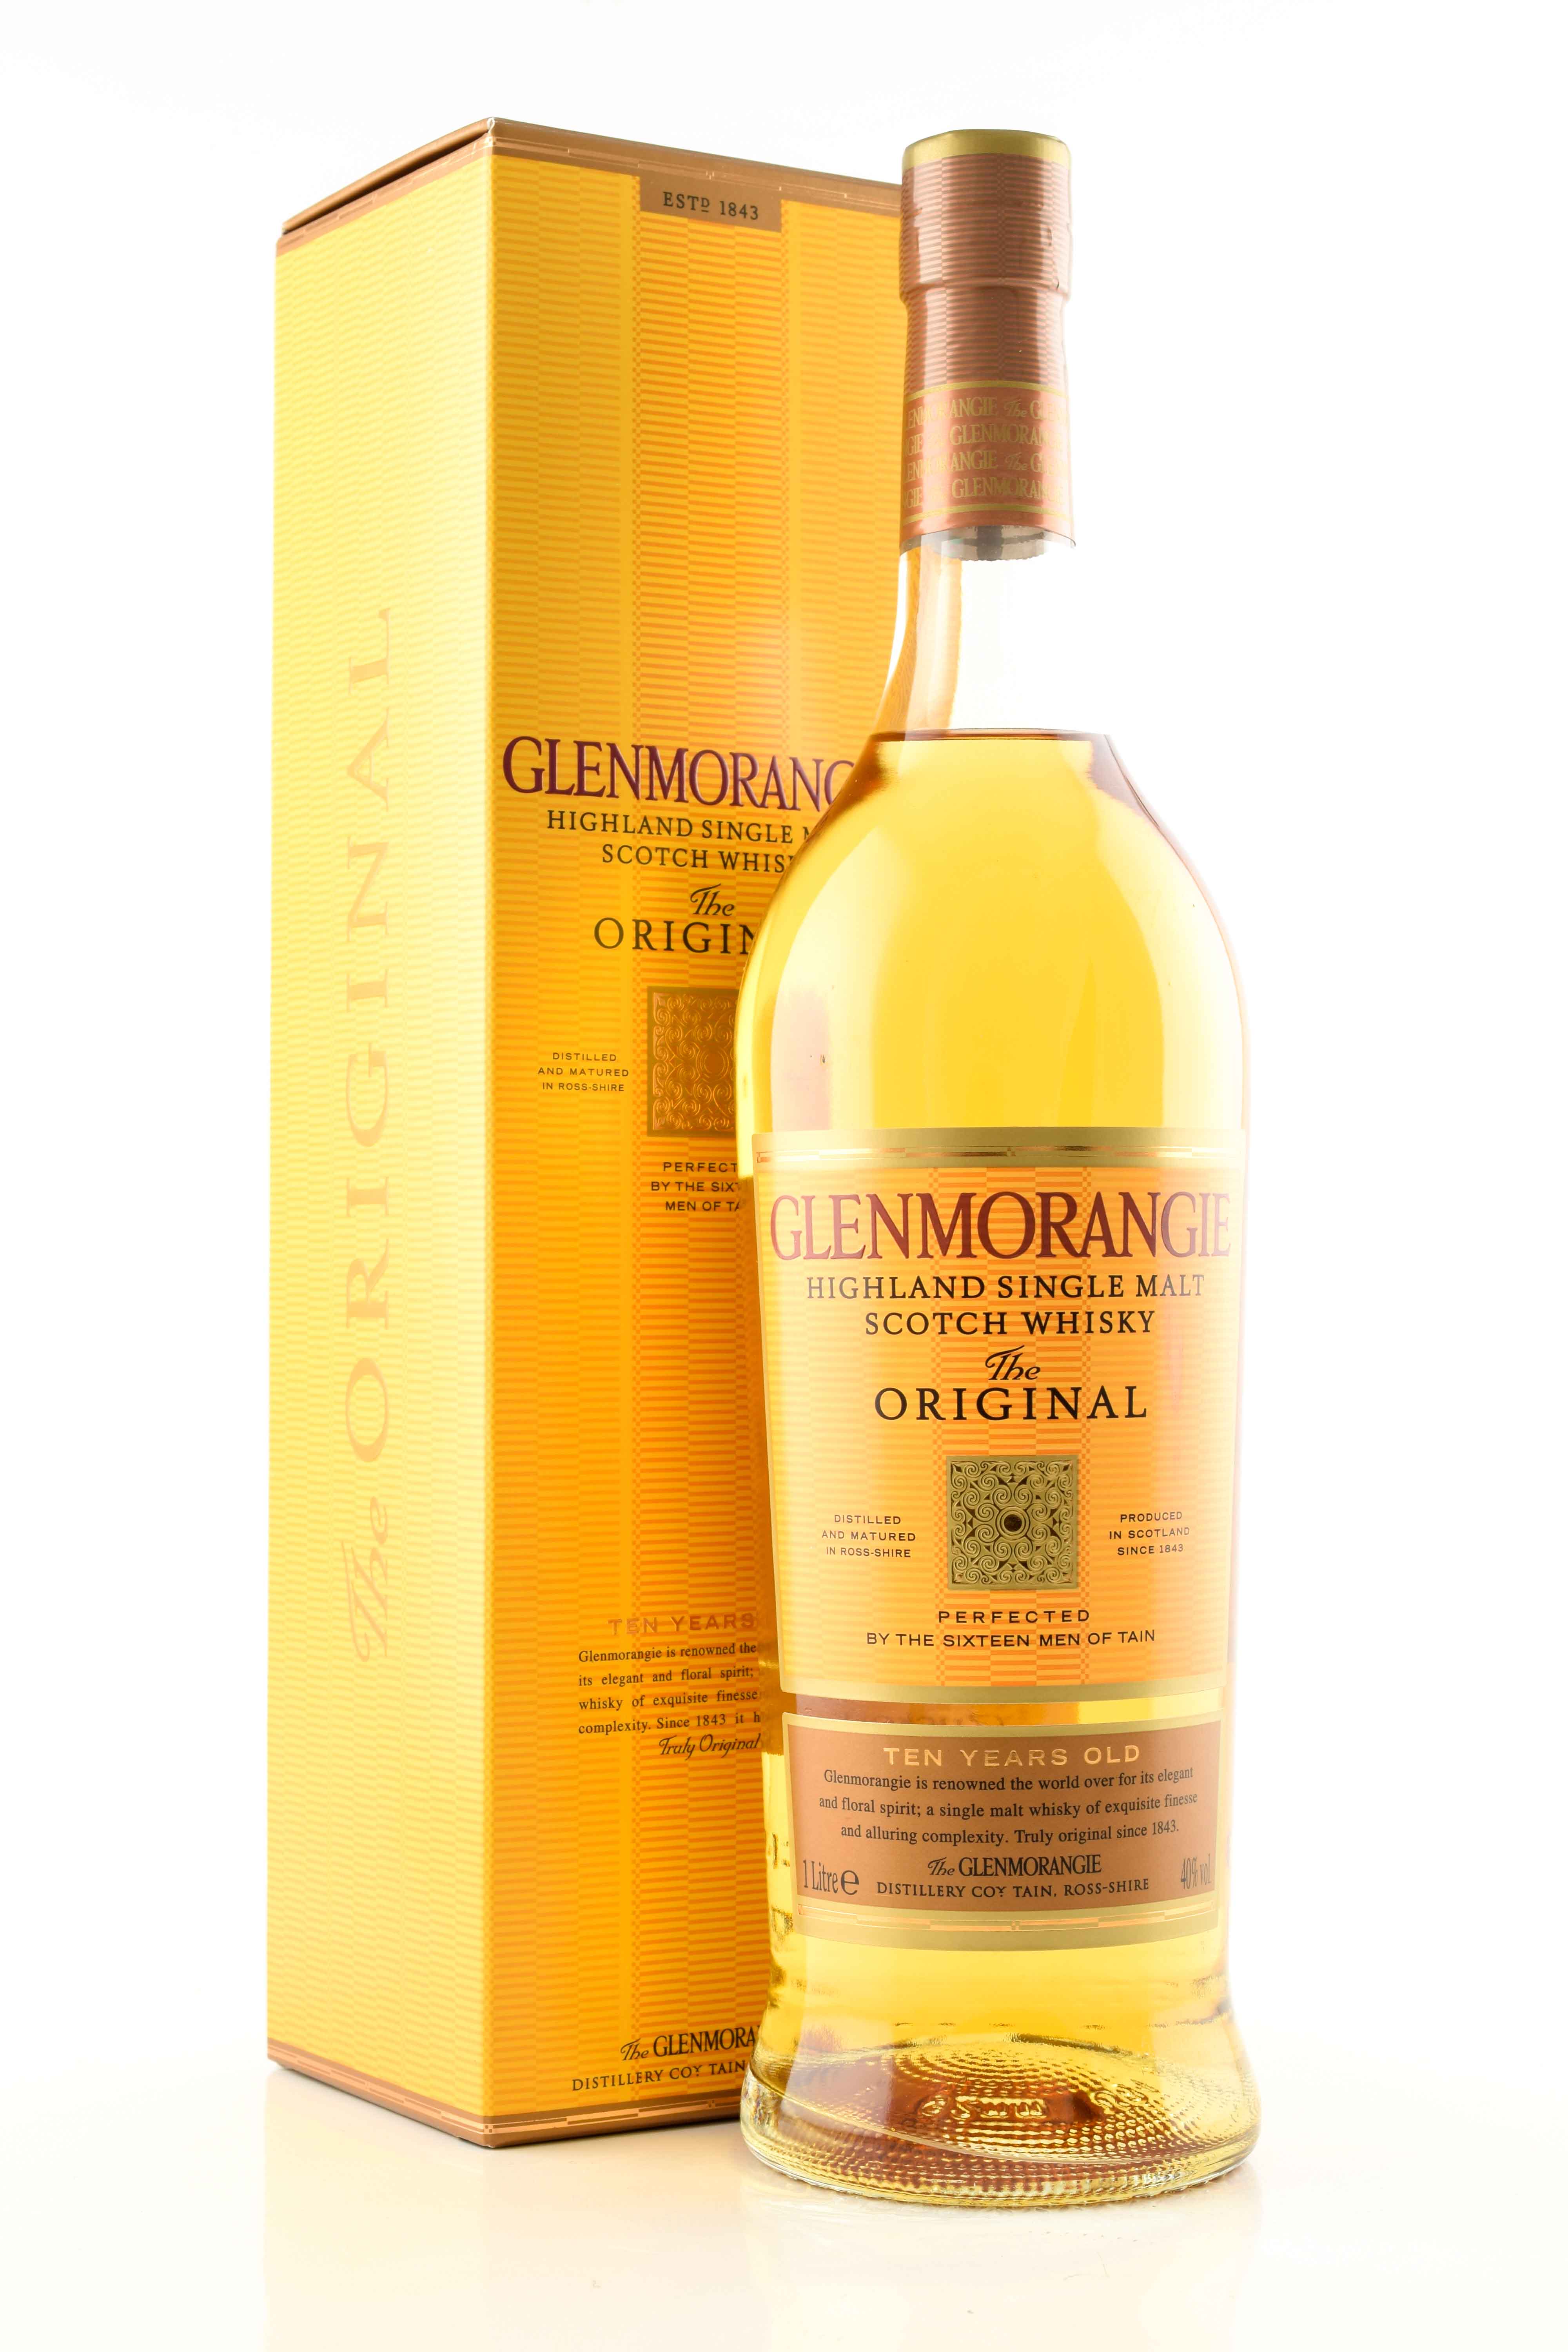 Year 40% Whisky Whisky Home Scotch 10 | 1.0L vol. Malts The Old Original Countries | | of | Highlands Glenmorangie |